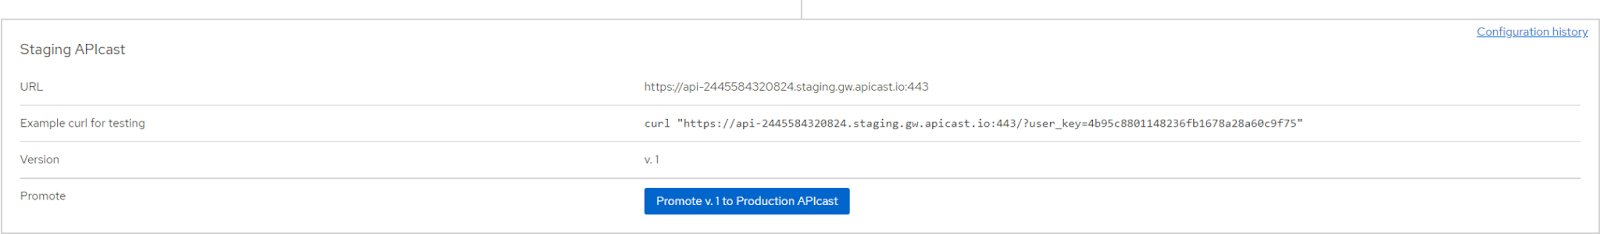 Staging APIcast details including a URL and an example curl command.